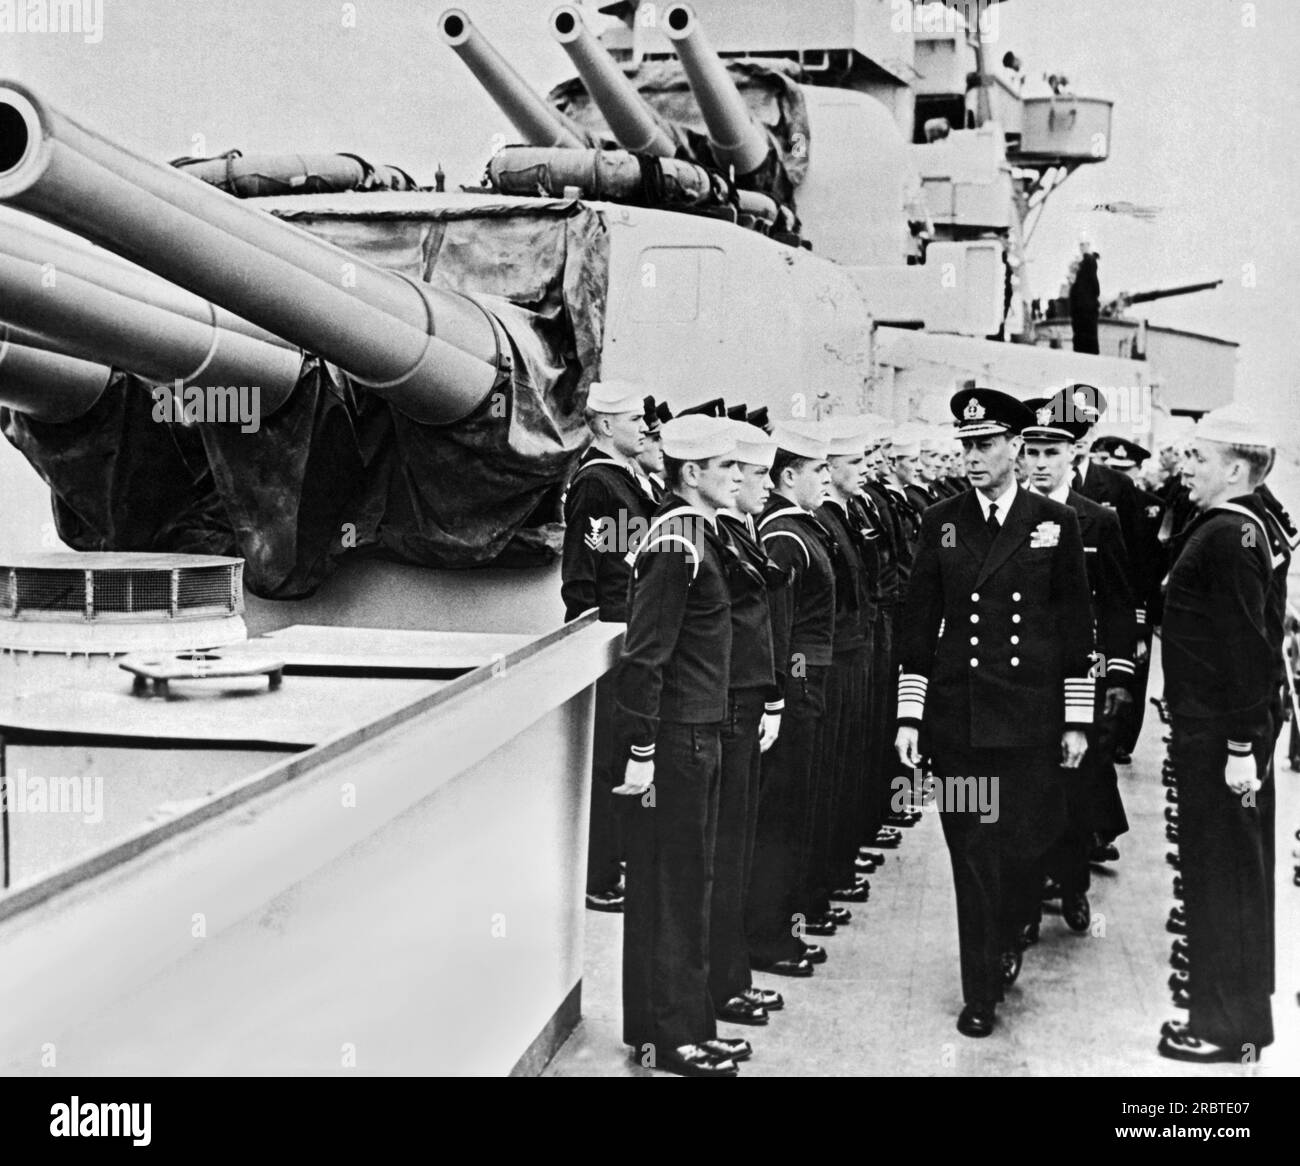 England:  June, 1944 King George VI of Great Britain moves down the line on an inspection tour of one of HMS Royal Navy warships. Little did the sailors know that the King was giving them a final inspection before D-Day. Stock Photo